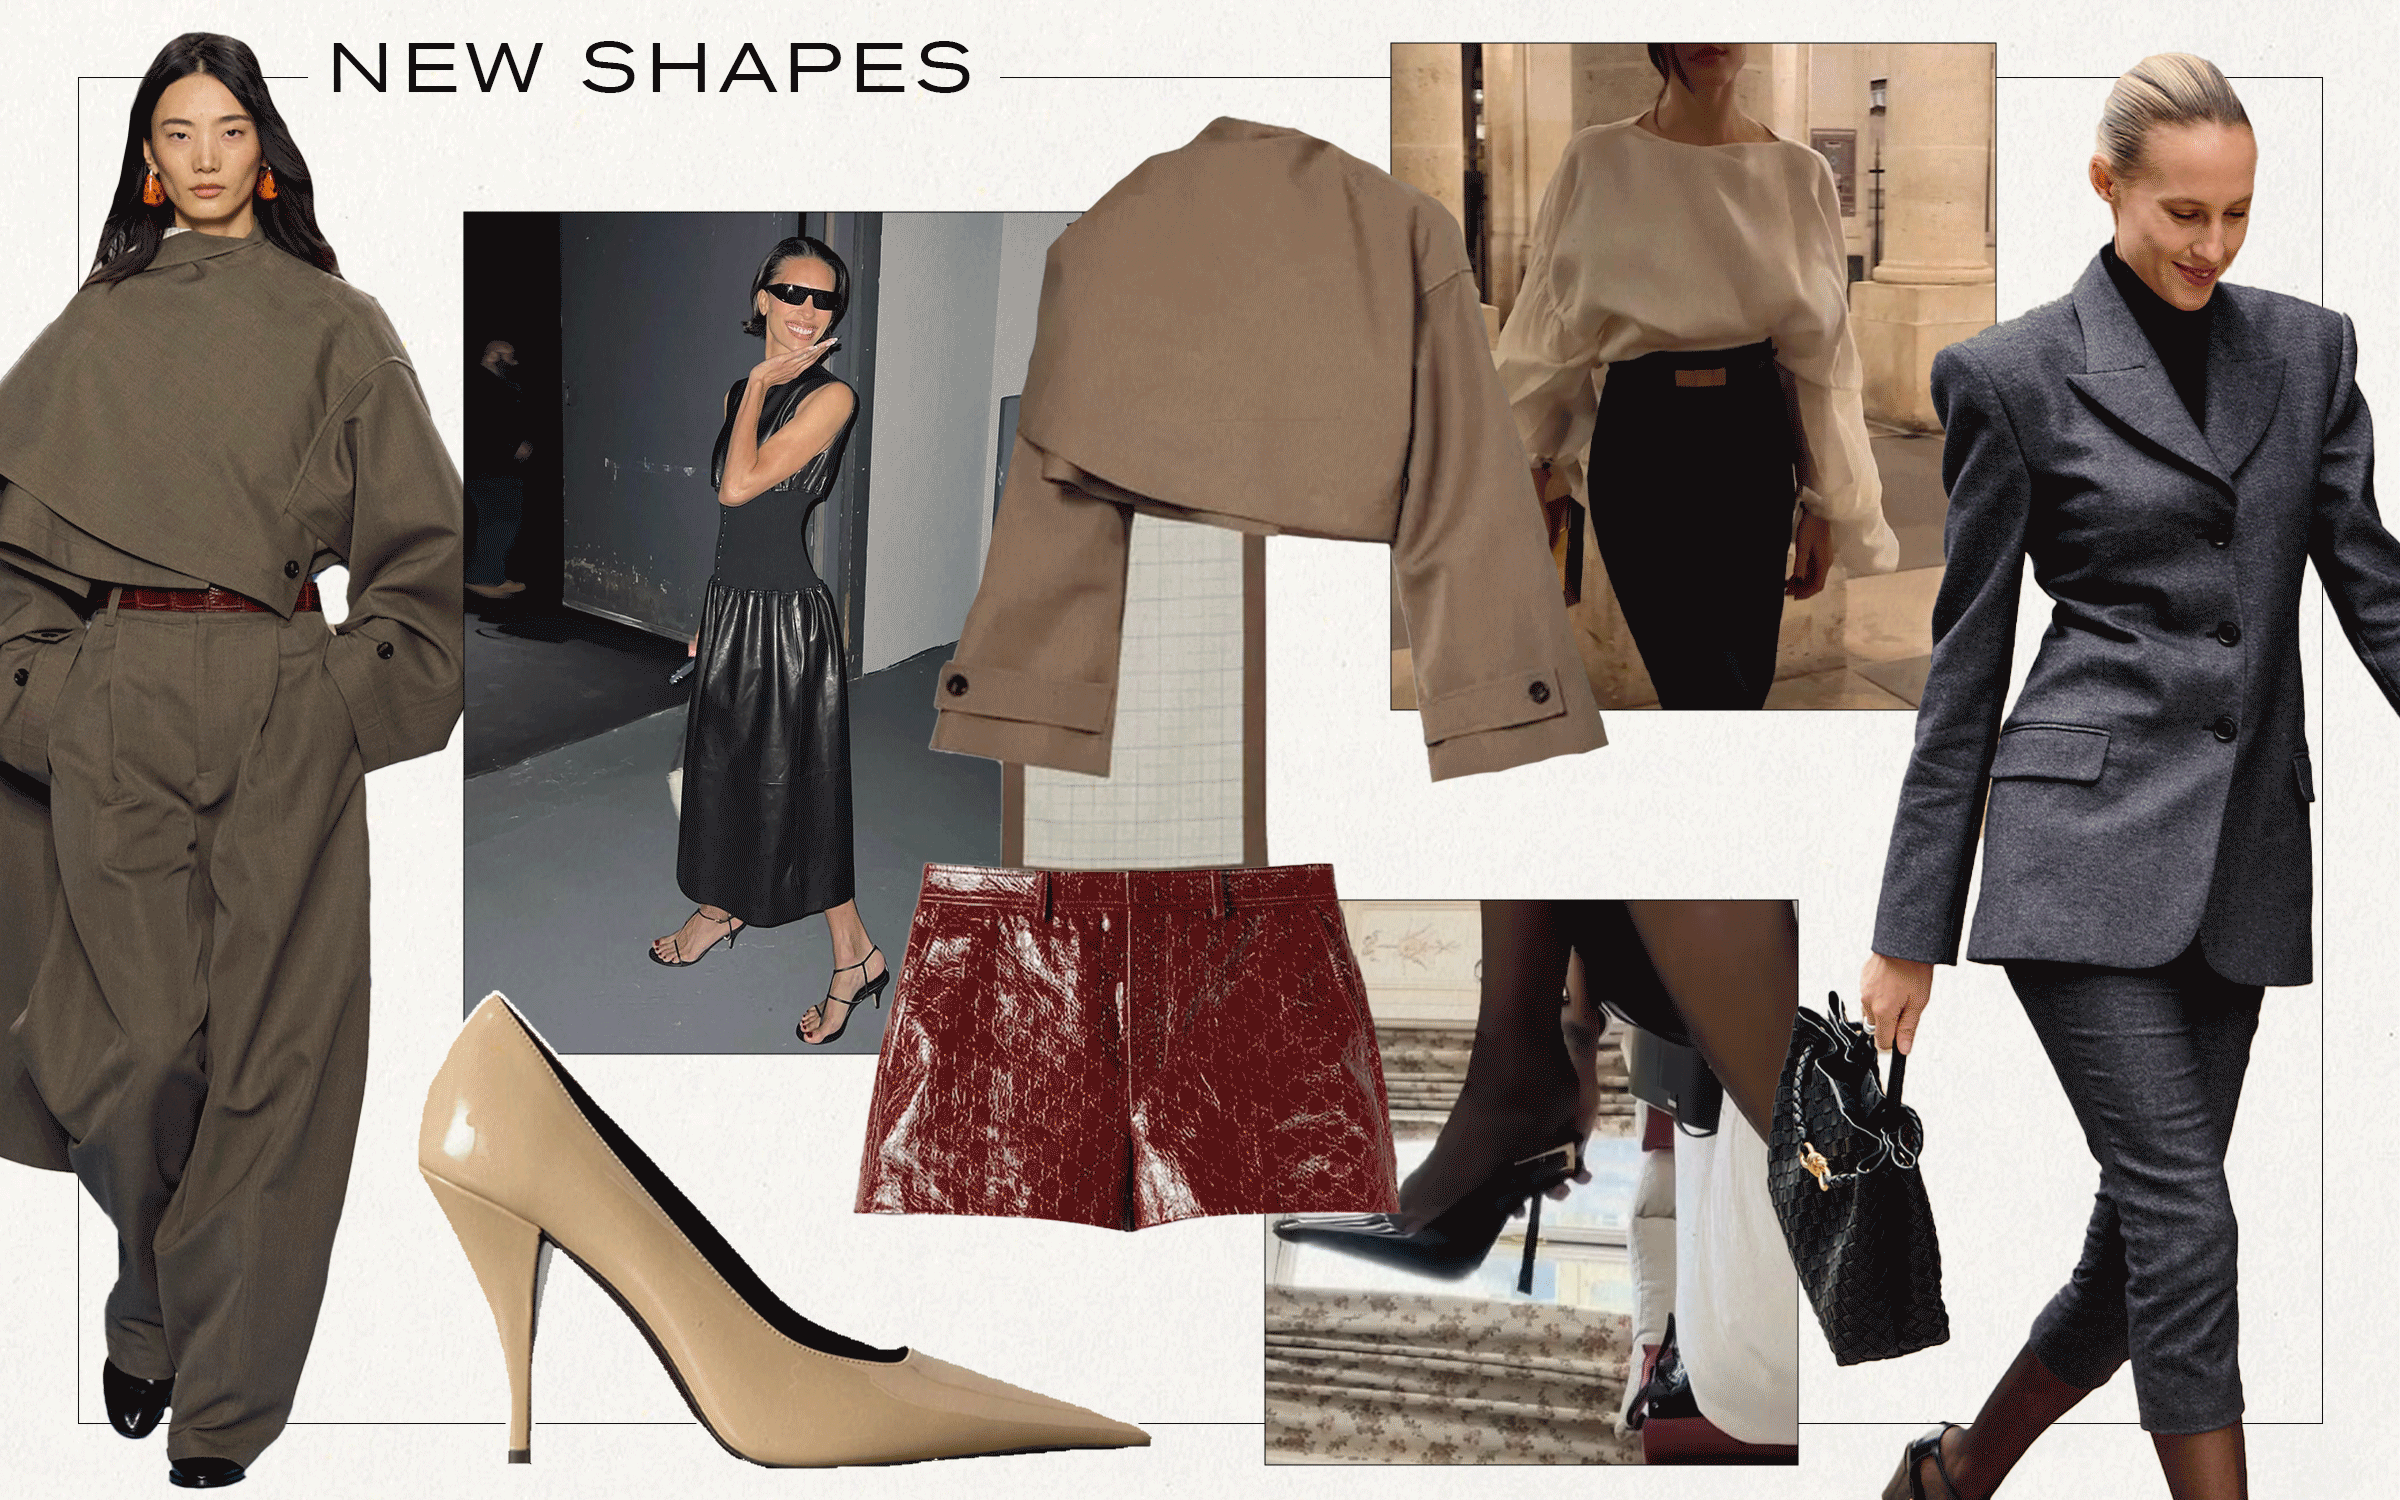 Spring Summer 2024 Shopping Trend Guide: A collage of street style, runway, and product imagery showcasing the New Shapes trend that highlights the introduction of cigarette pants, capri pants, hourglass shapes, sweeping and funnel neck collars, and high heels for spring.